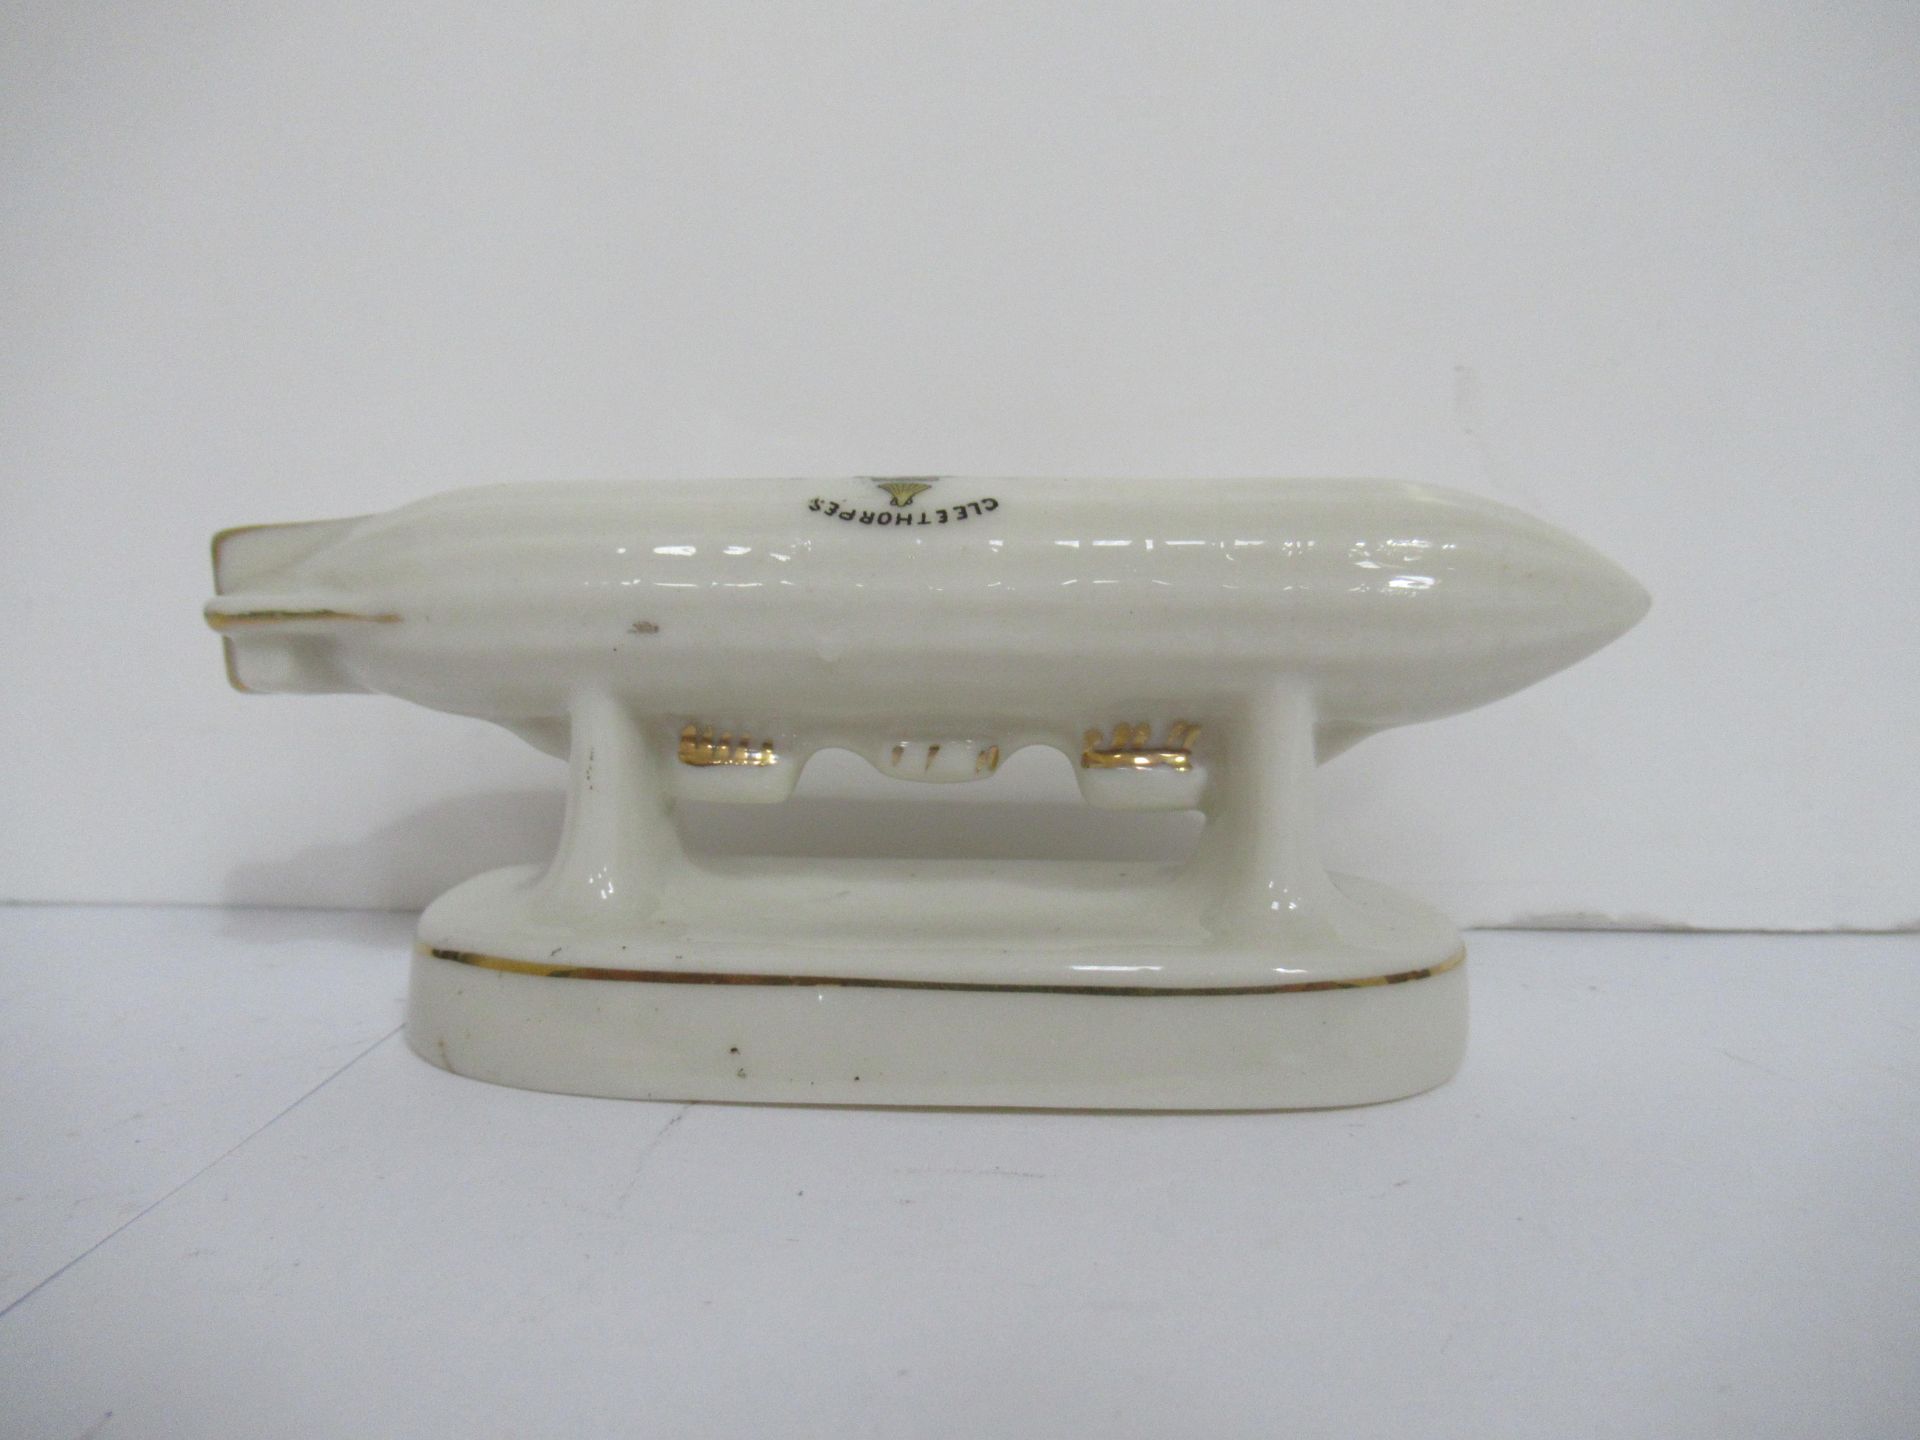 Crested China Alexandra model of airship with Cleethorpes coat of arms - Image 3 of 9